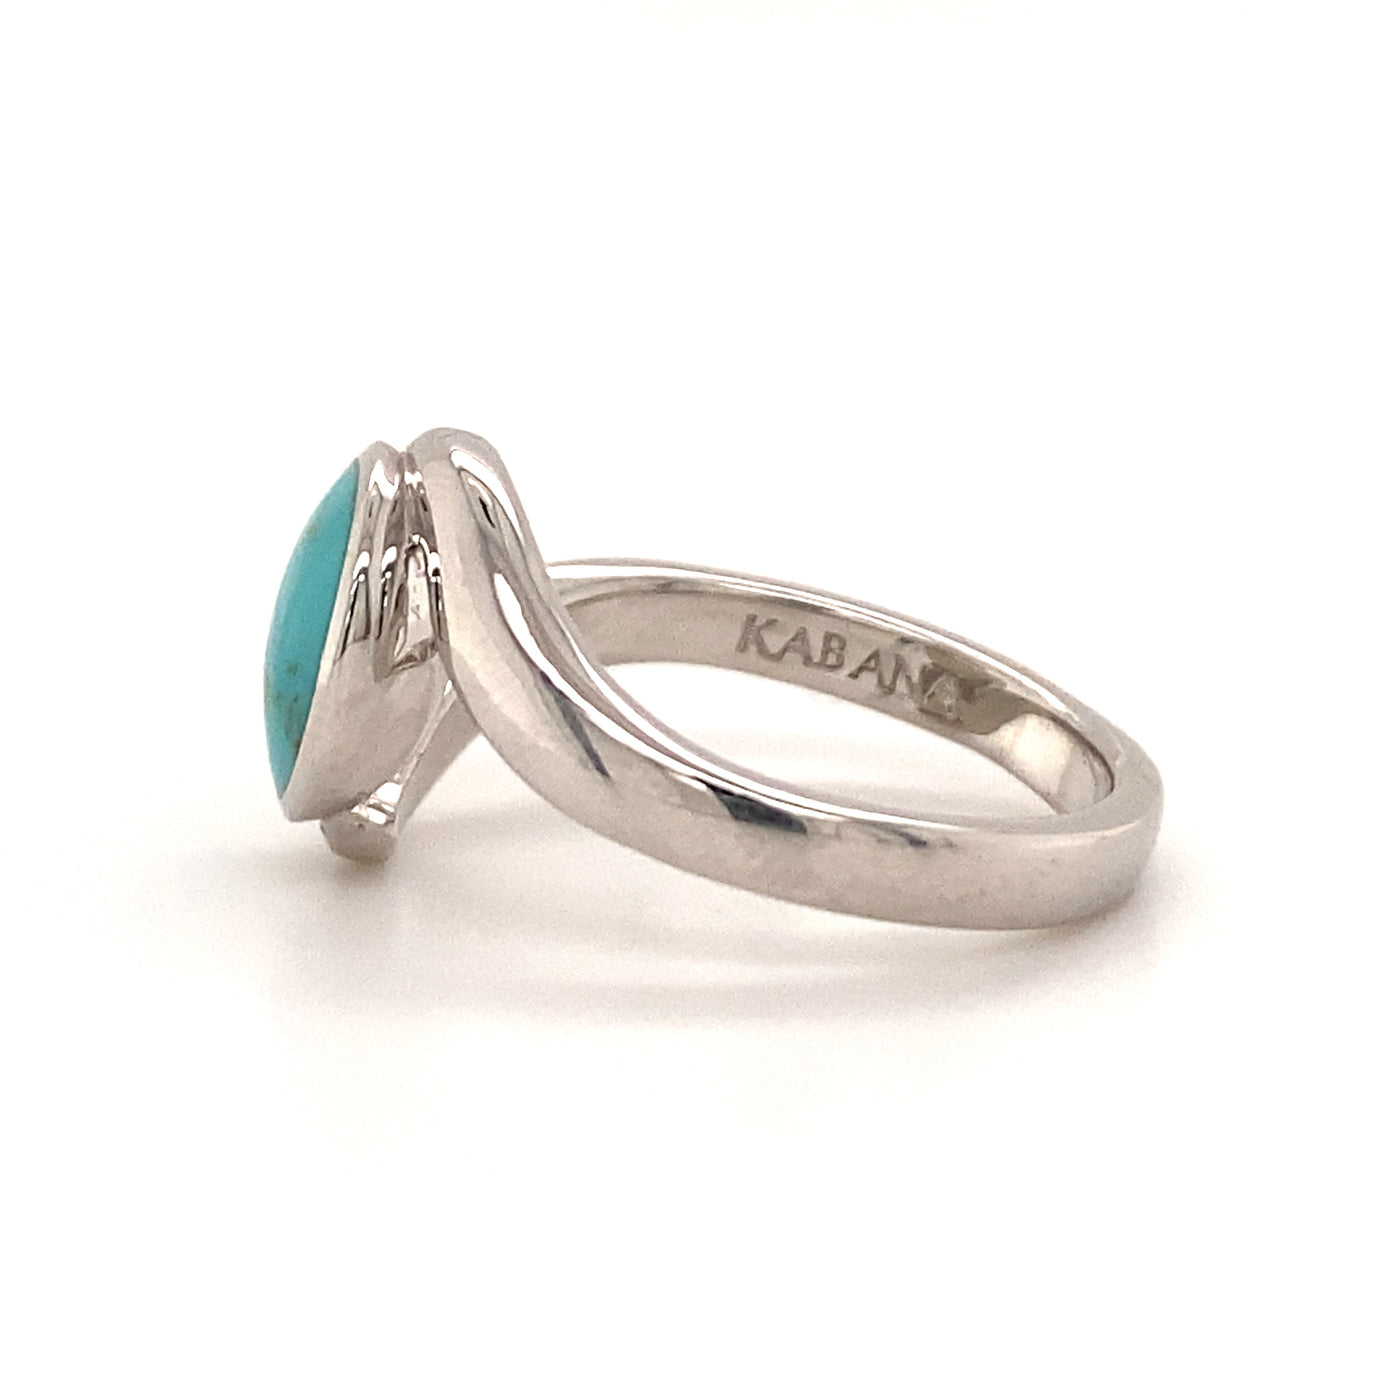 Kabana Silver Round Turquoise Inlay Ring R-CHR659T